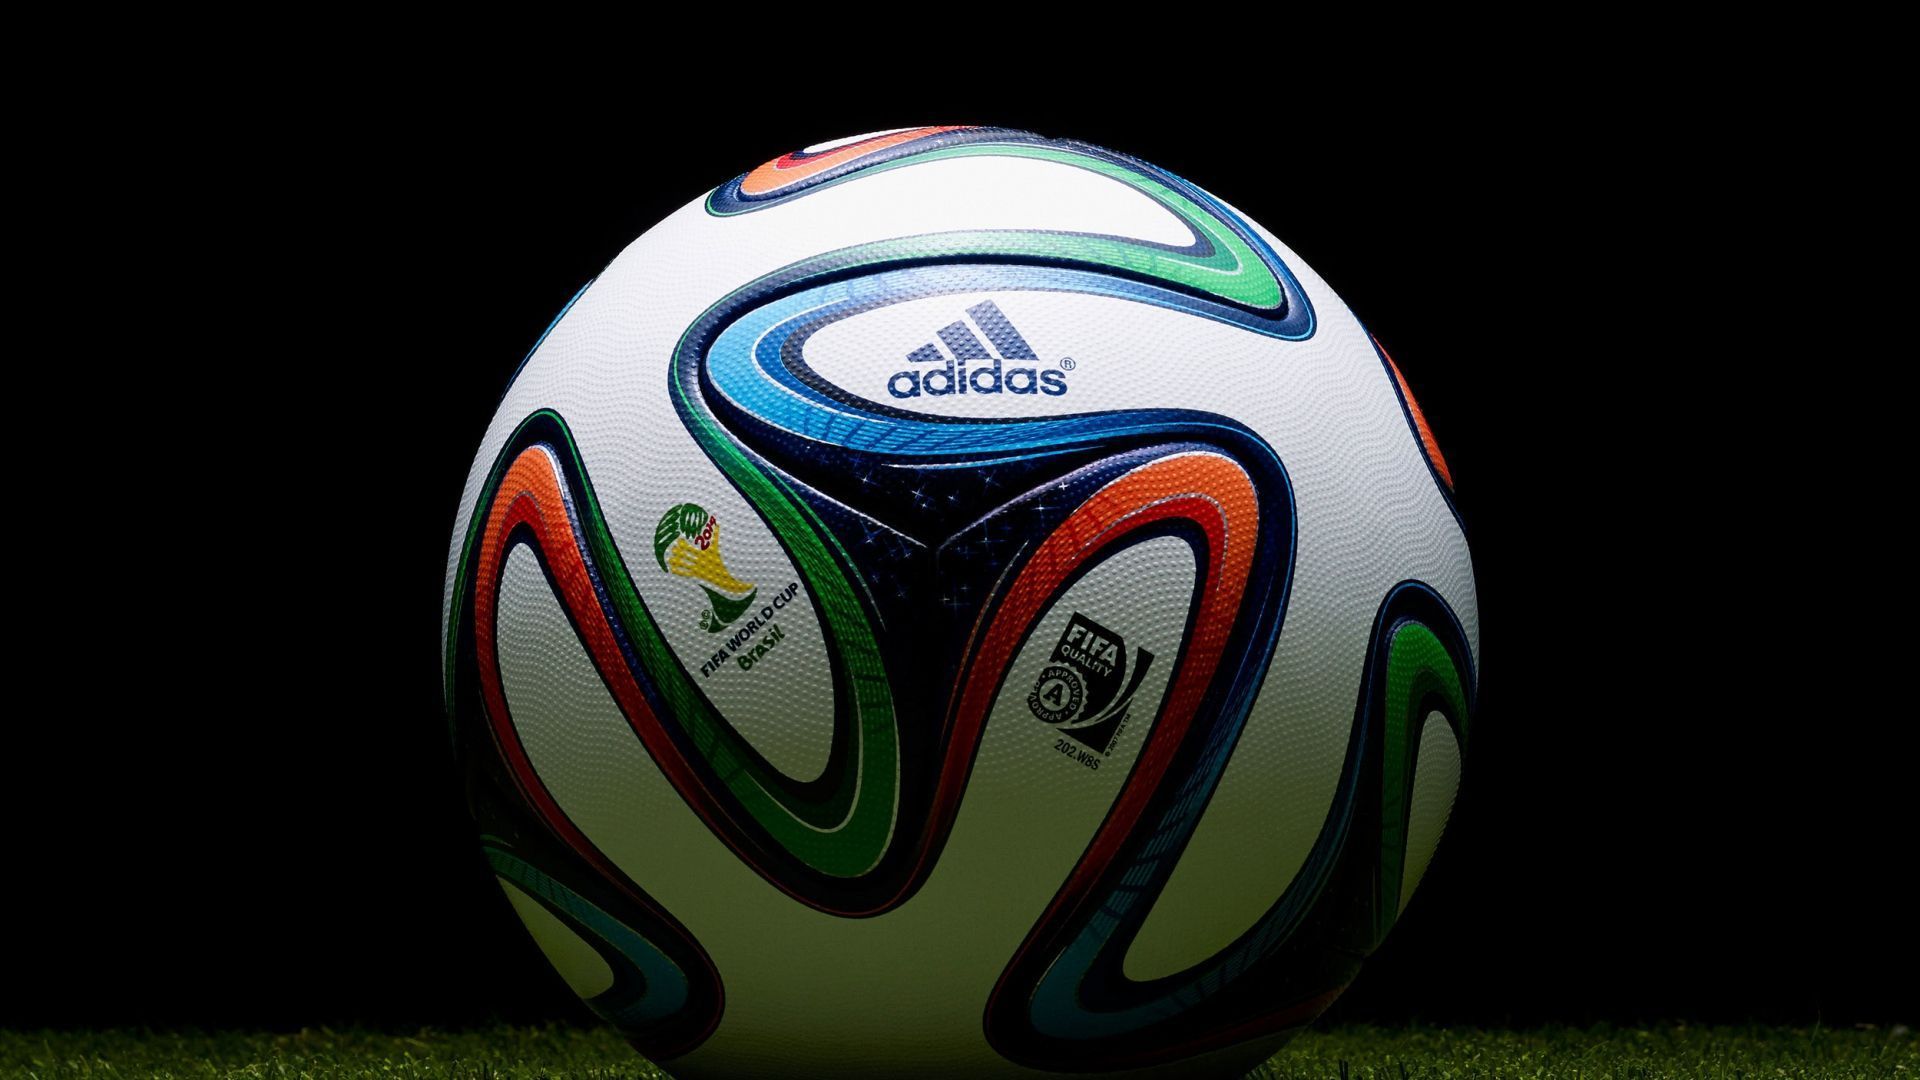 Download Wallpaper 1920x1080 Brazuca, 2014, World cup, Adidas ...